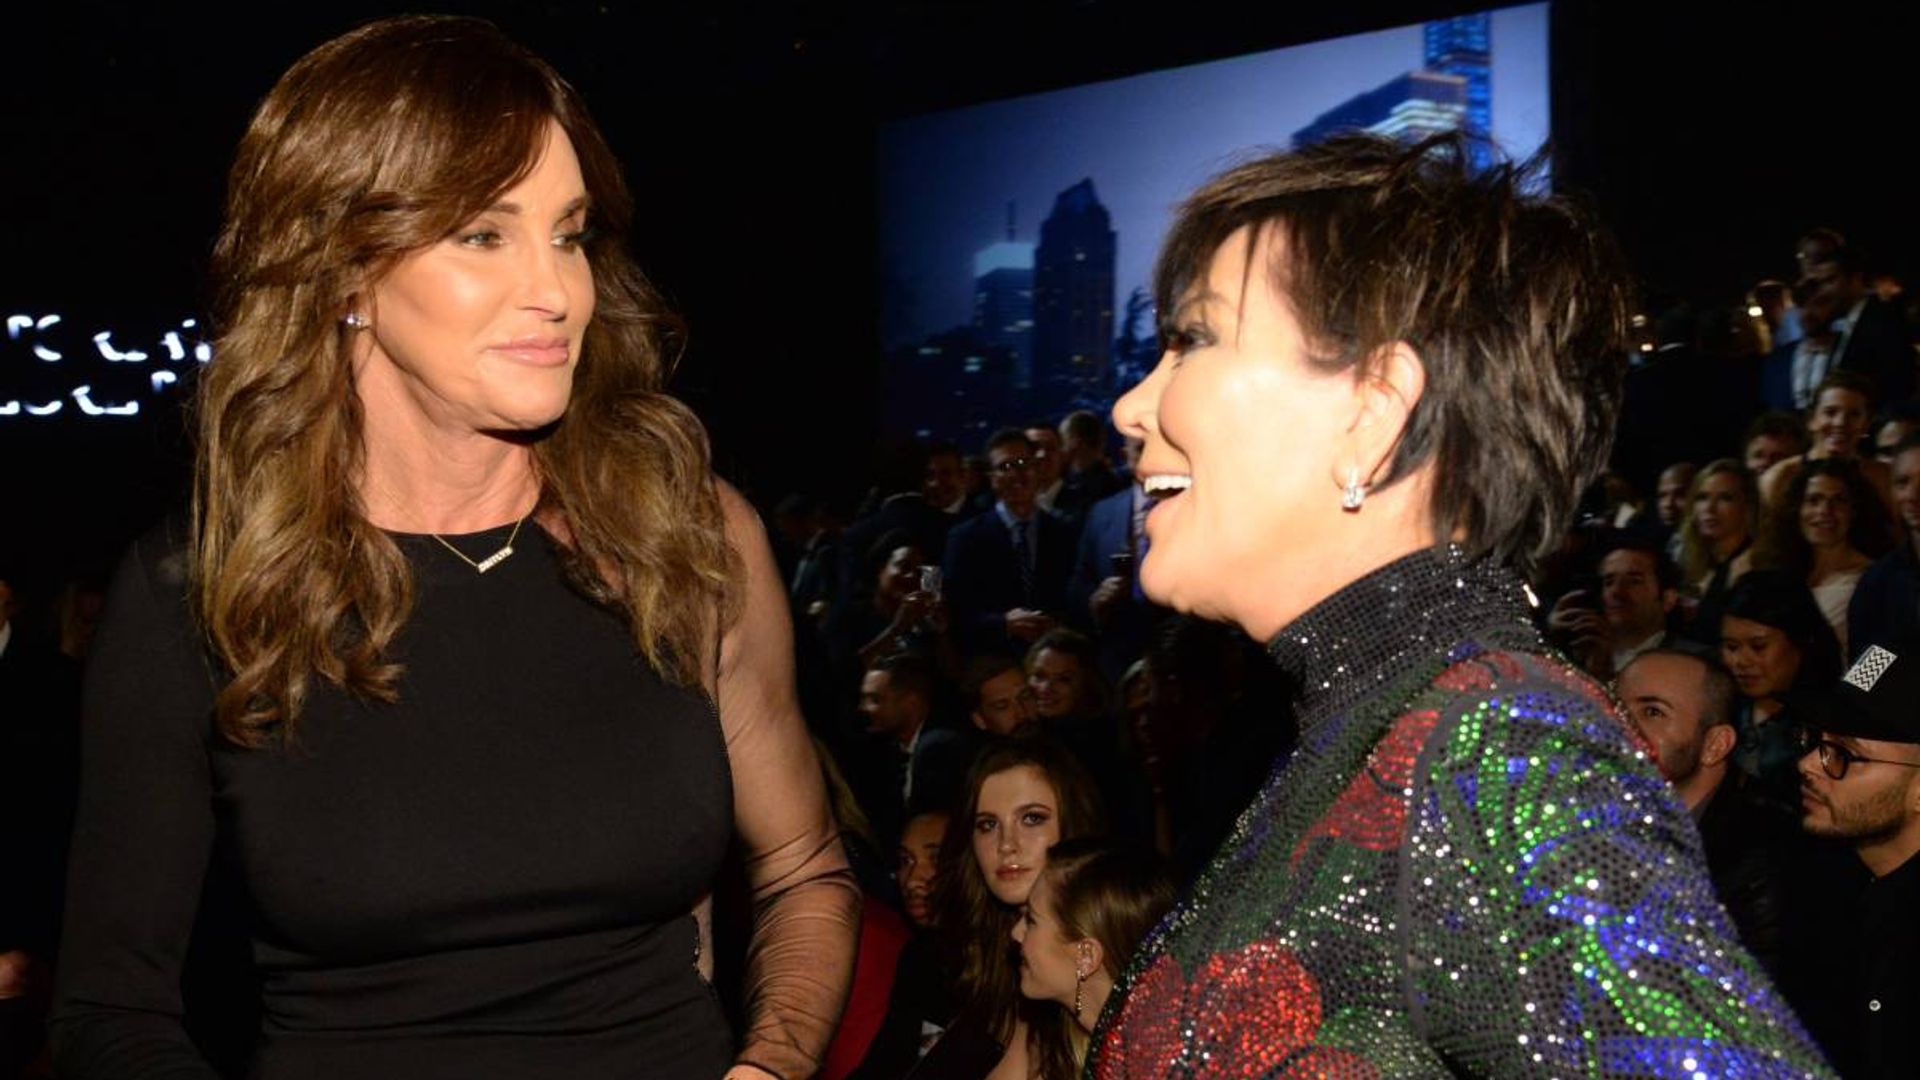 Caitlyn Jenner responds to Kris Jenner's Father's Day message